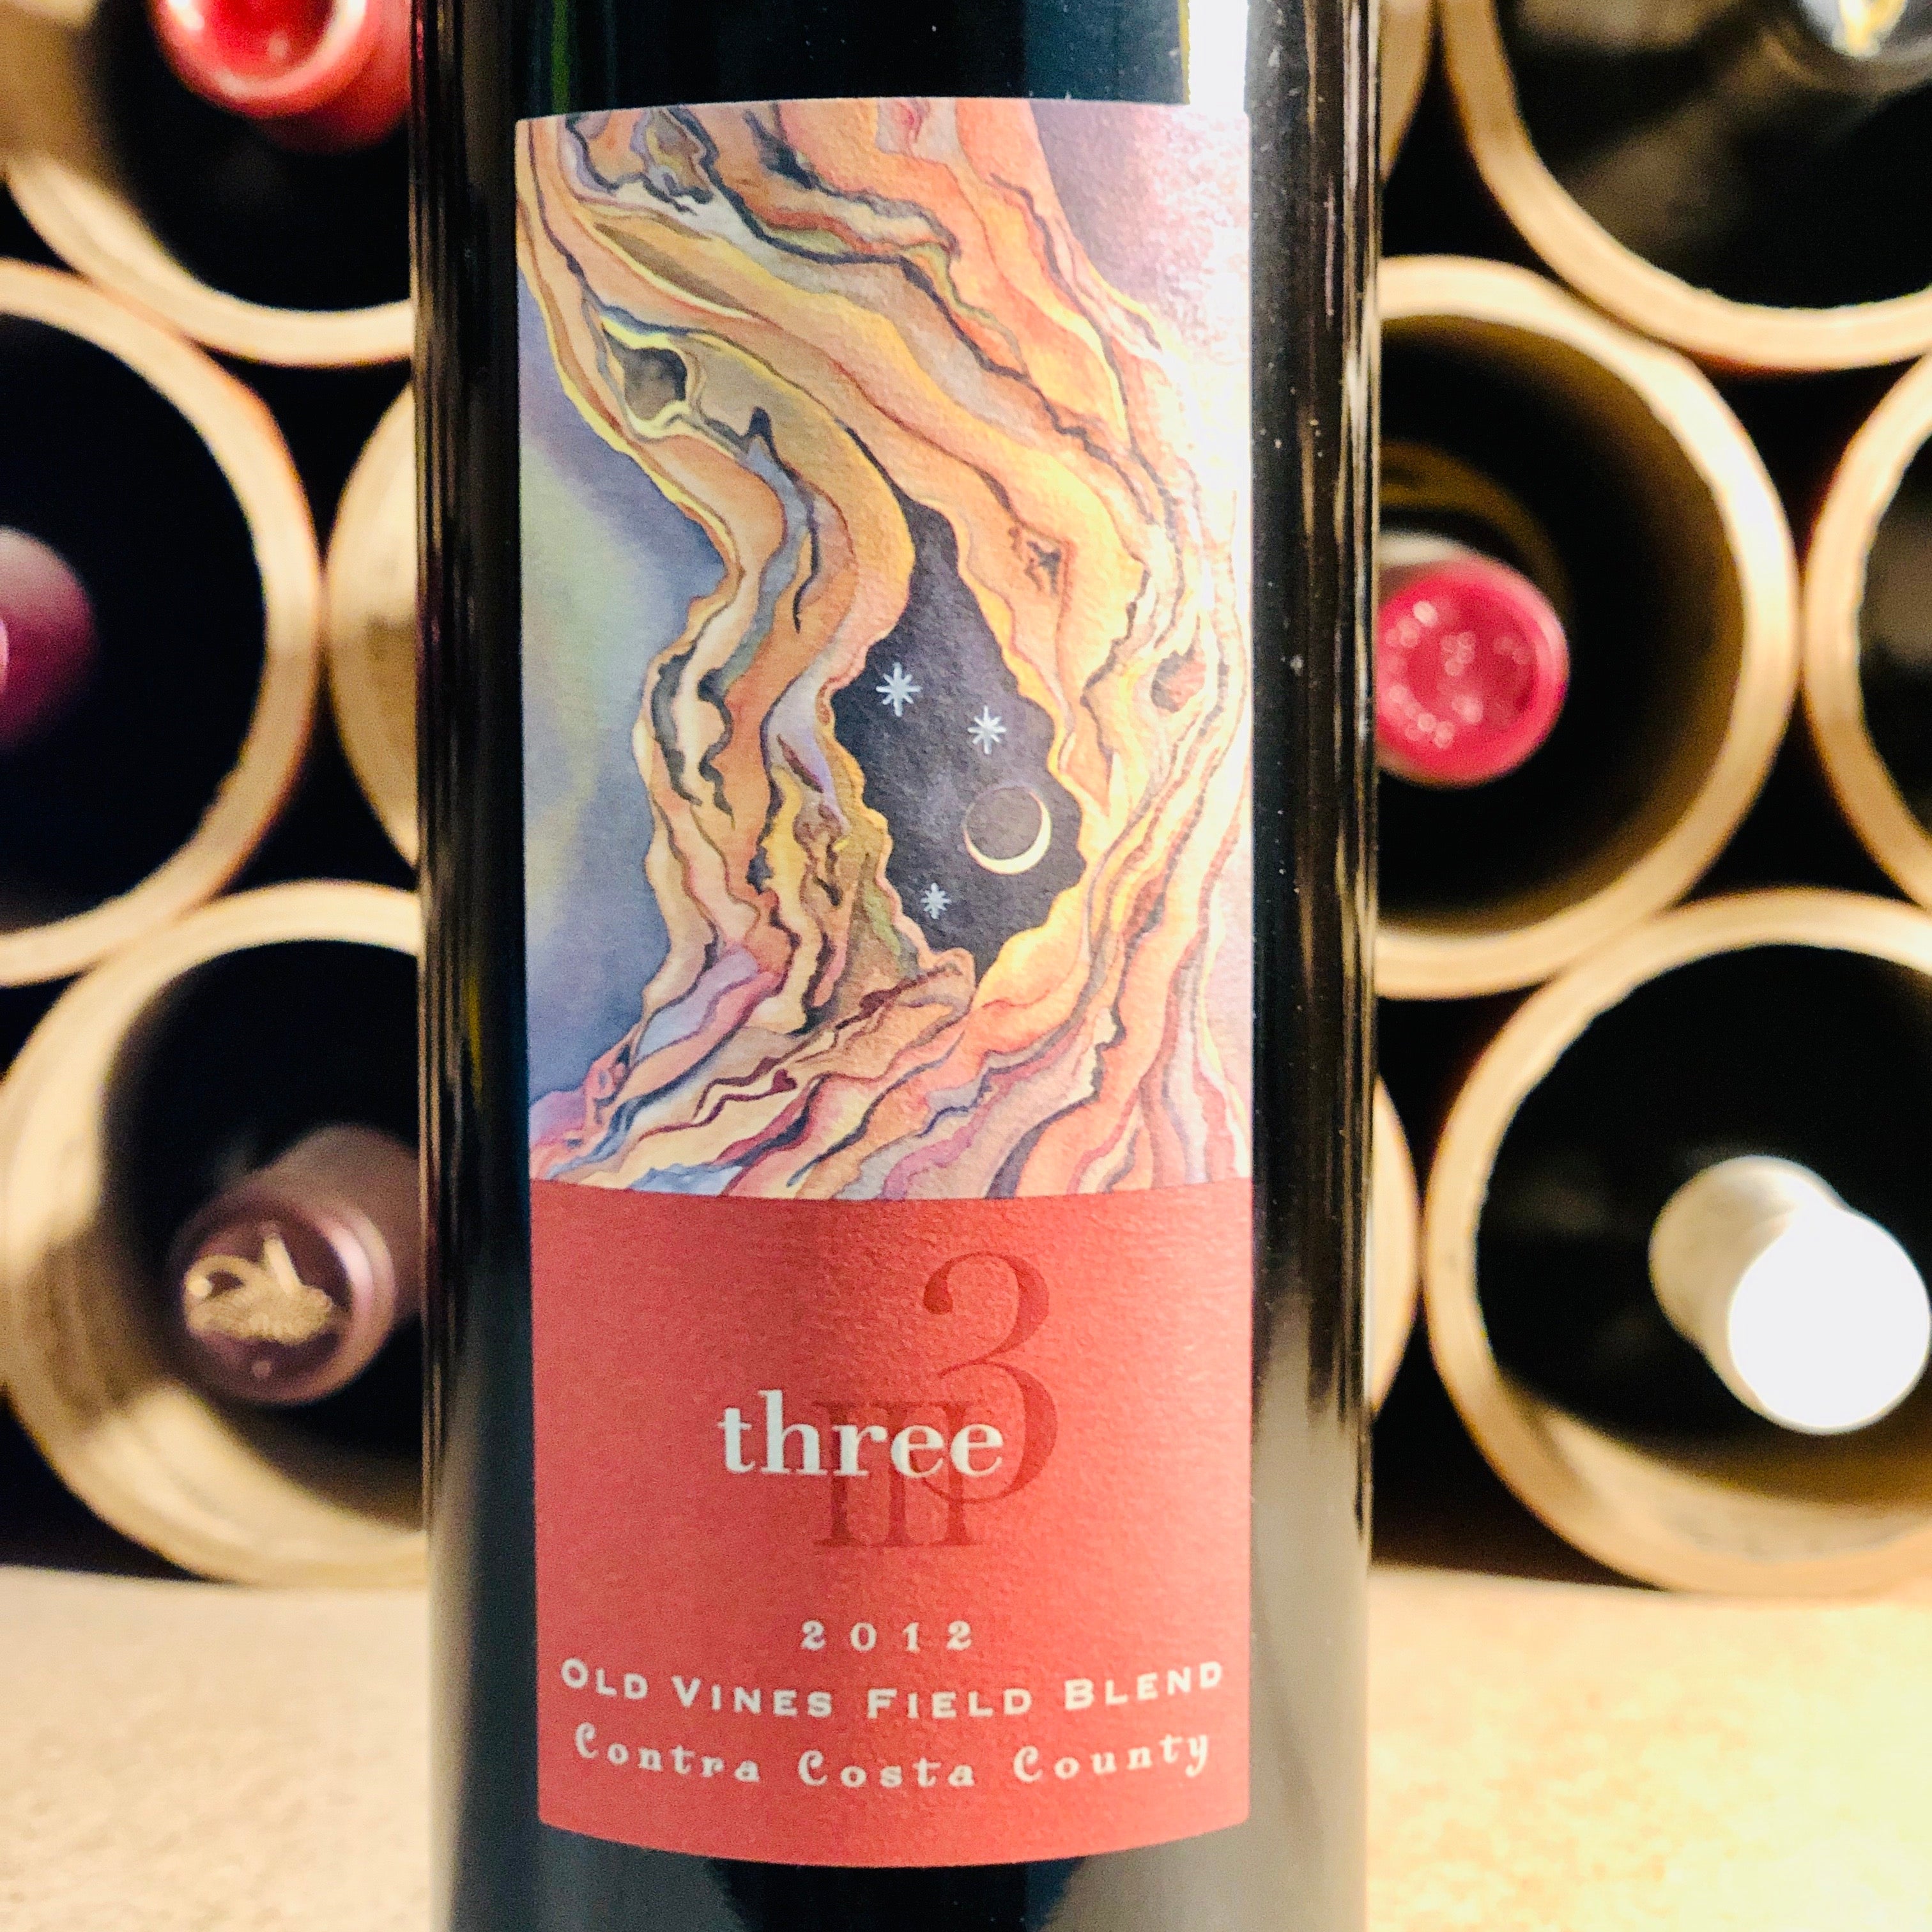 Three, Conta Costa County, Old Vines Field Blend 2012 